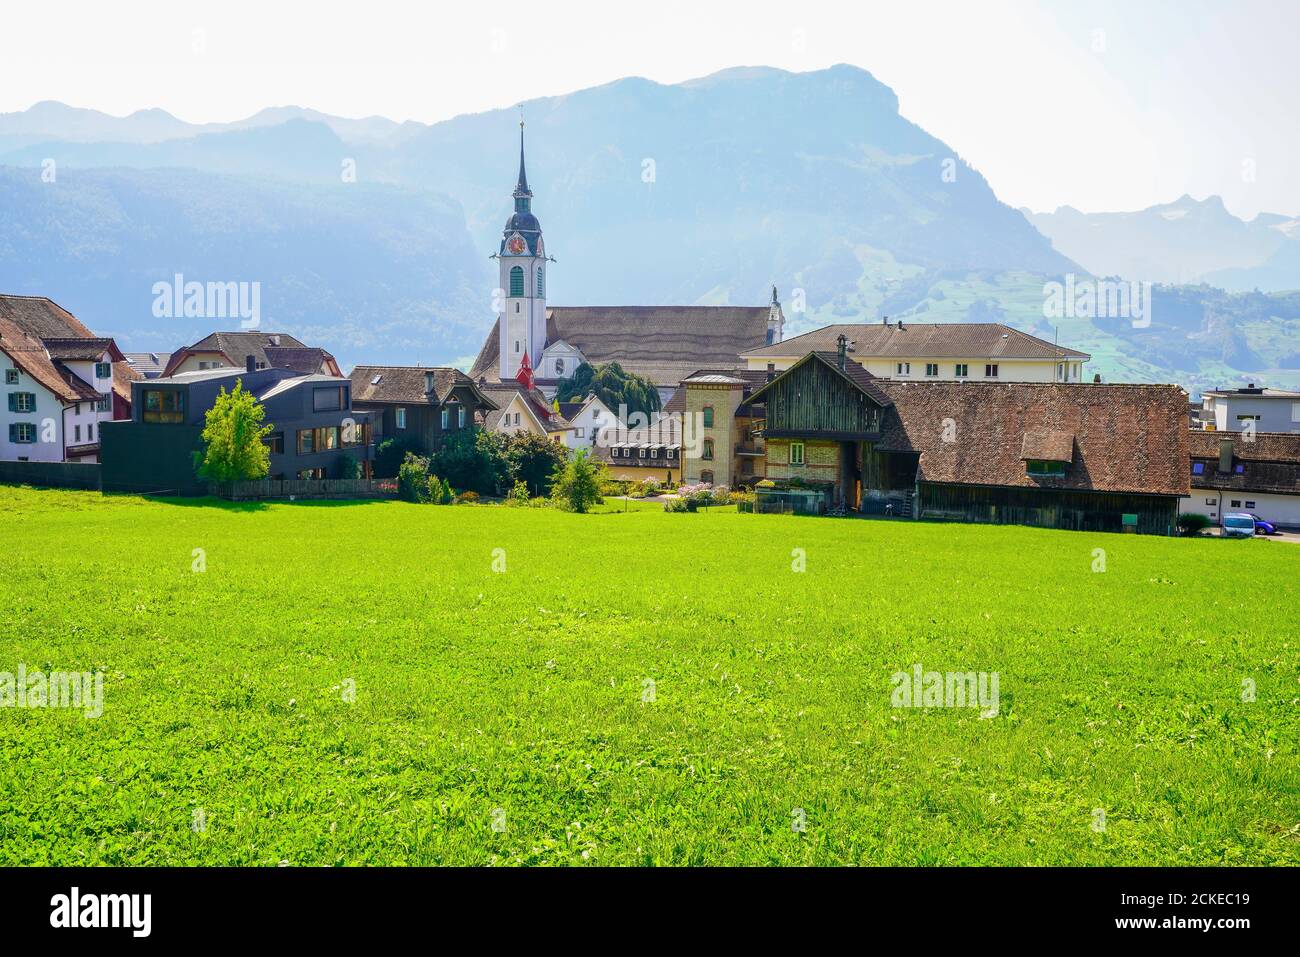 Panoramic view of old town Schwyz and Church of St. Martin.The capital of canton of Schwyz in Switzerland. The Federal Charter of 1291 or Bundesbr Stock Photo